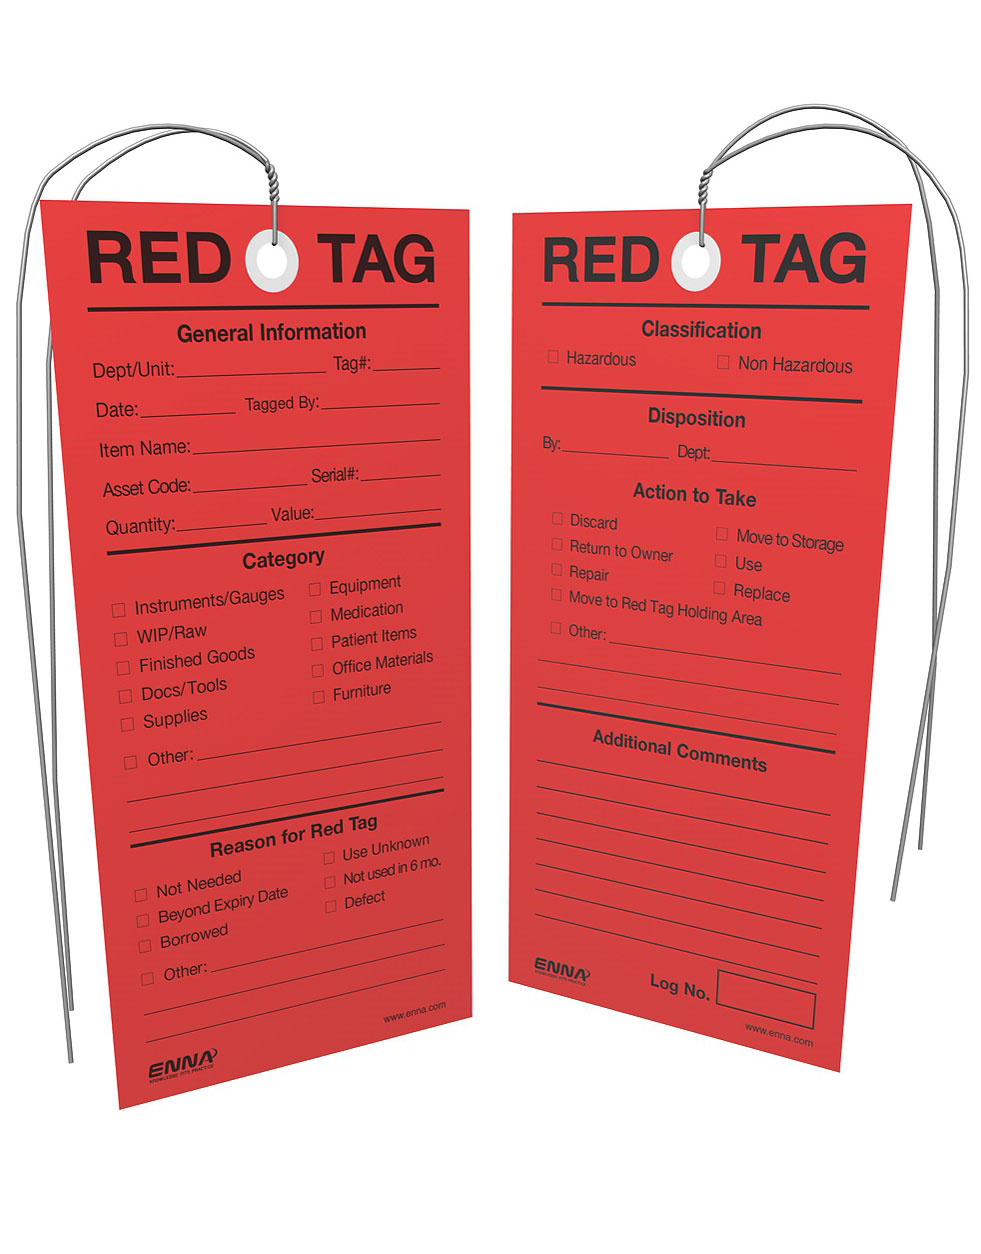 5S Red Tag Center Sign with Tags Holder